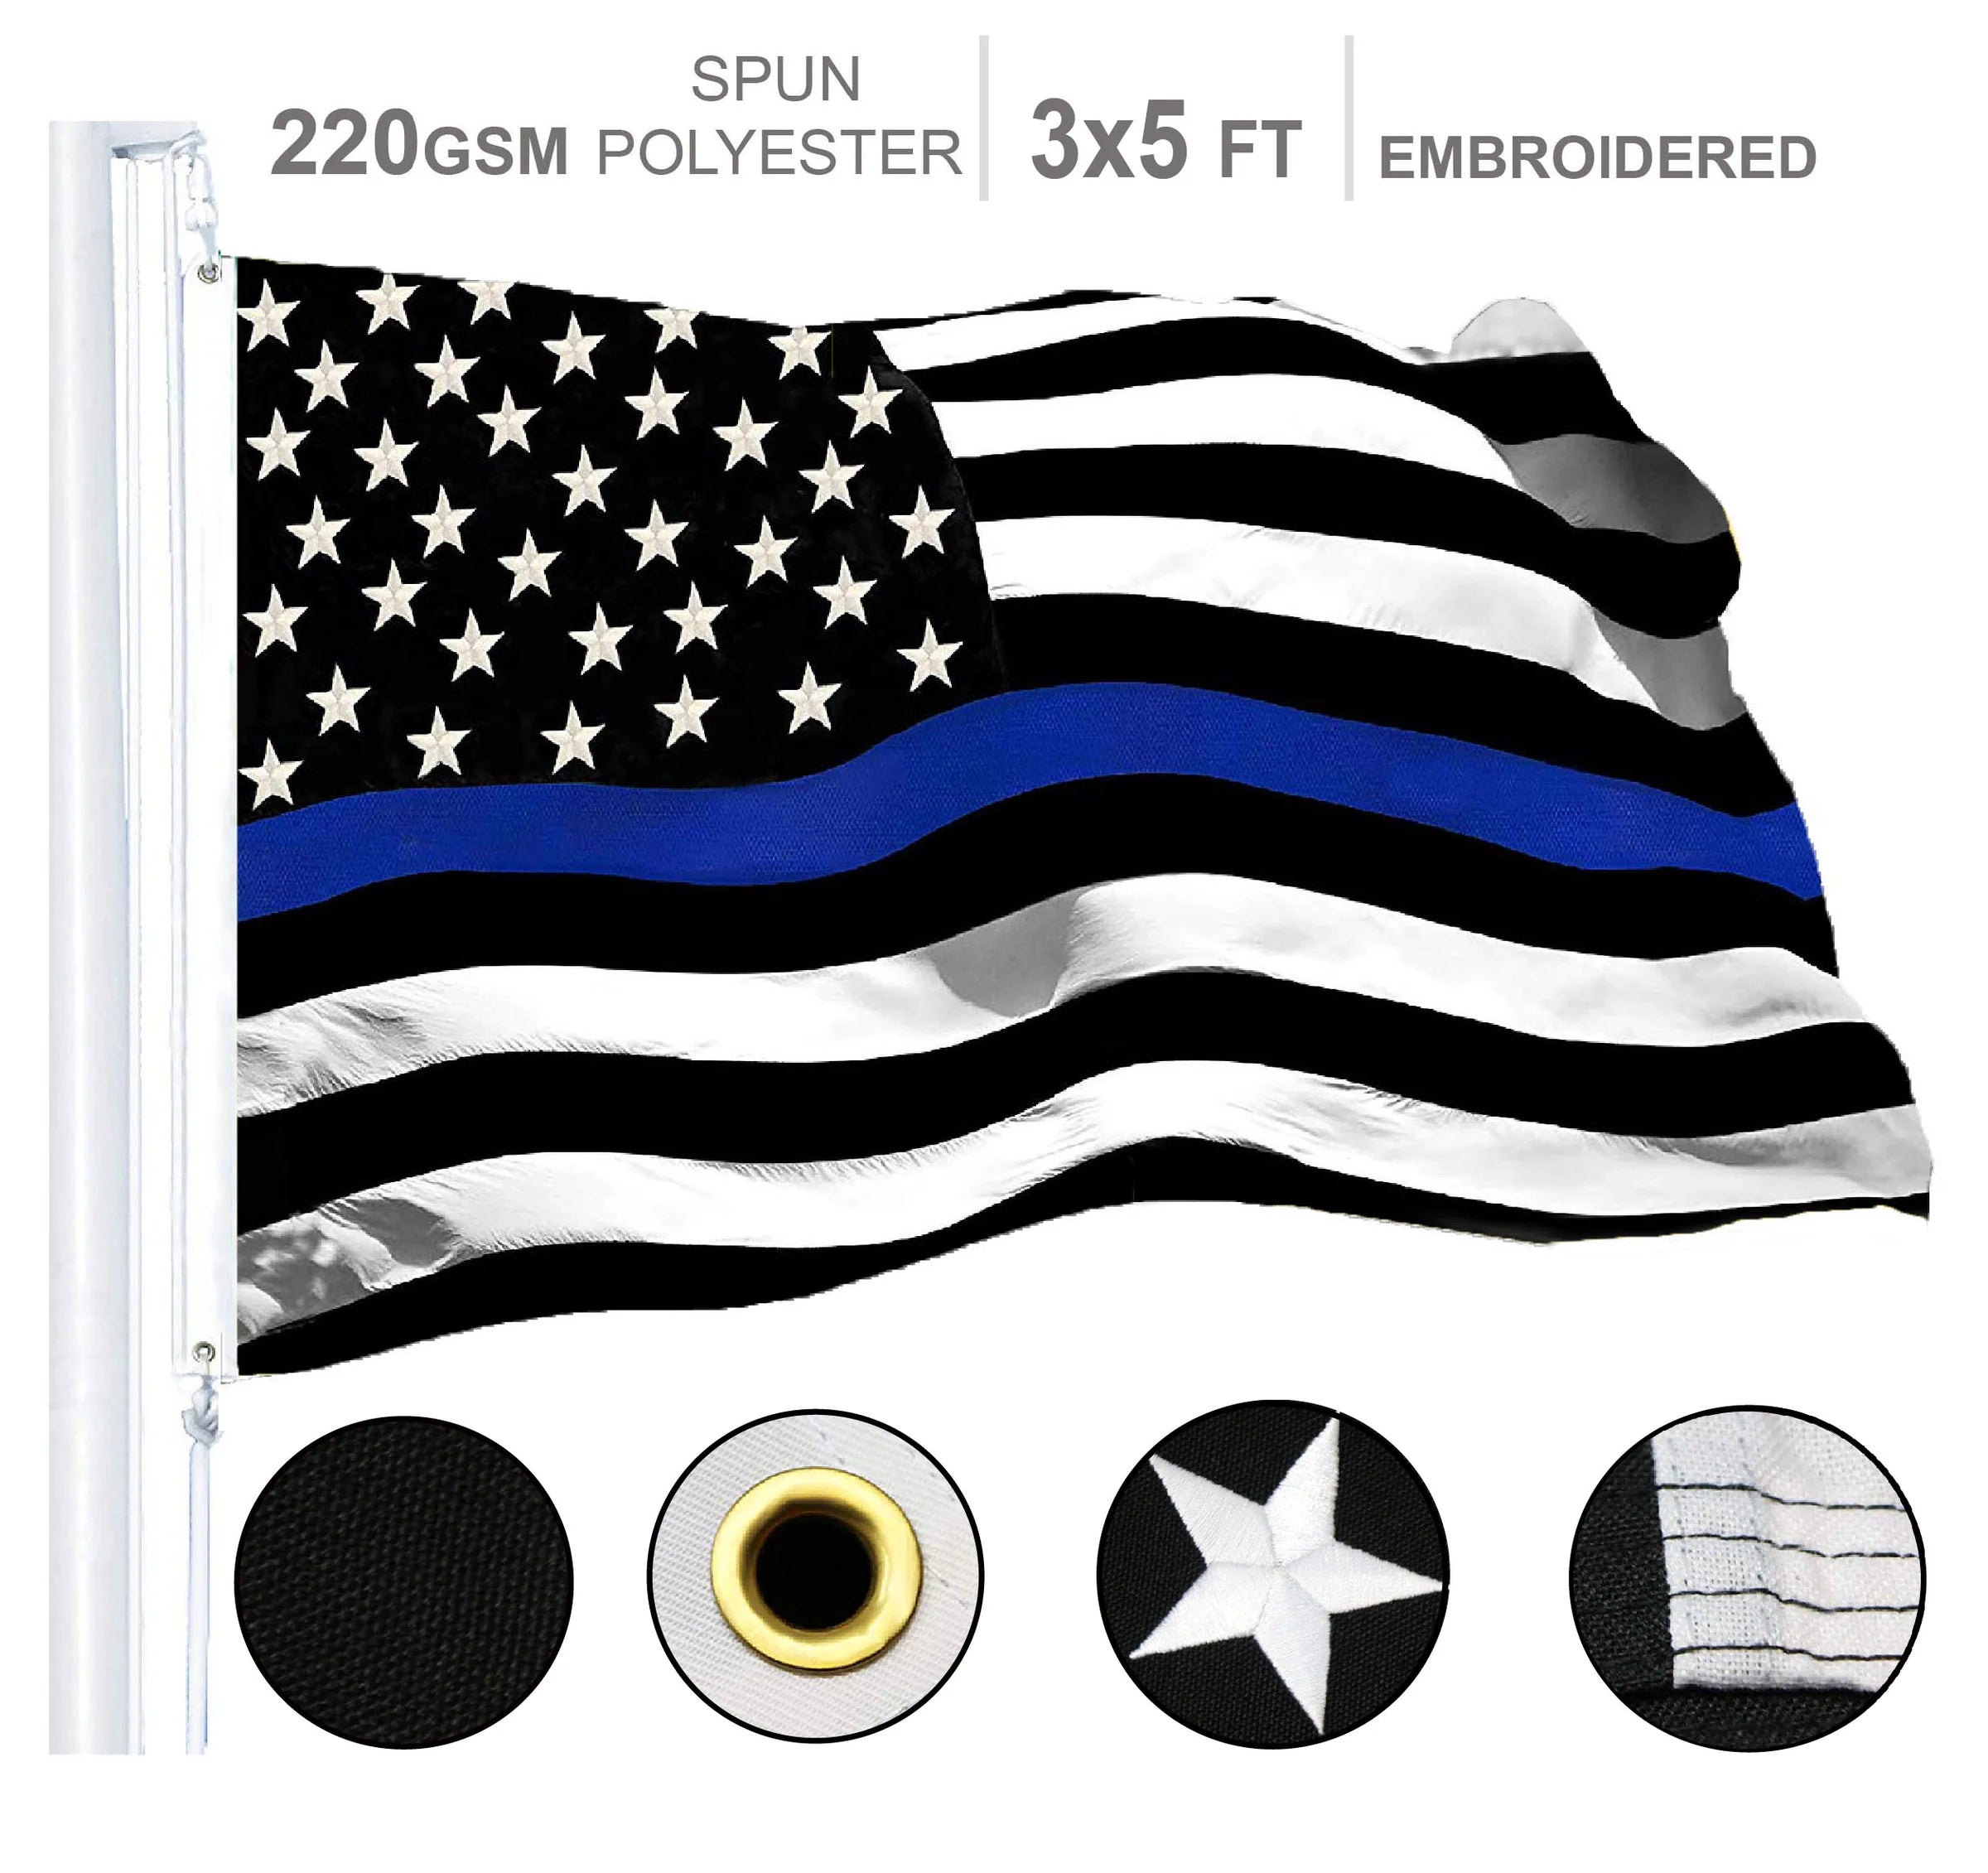 Thin Blue Line Flag 220gsm Embroidered Spun Polyester 3x5 Ft – Harriman  Army-Navy